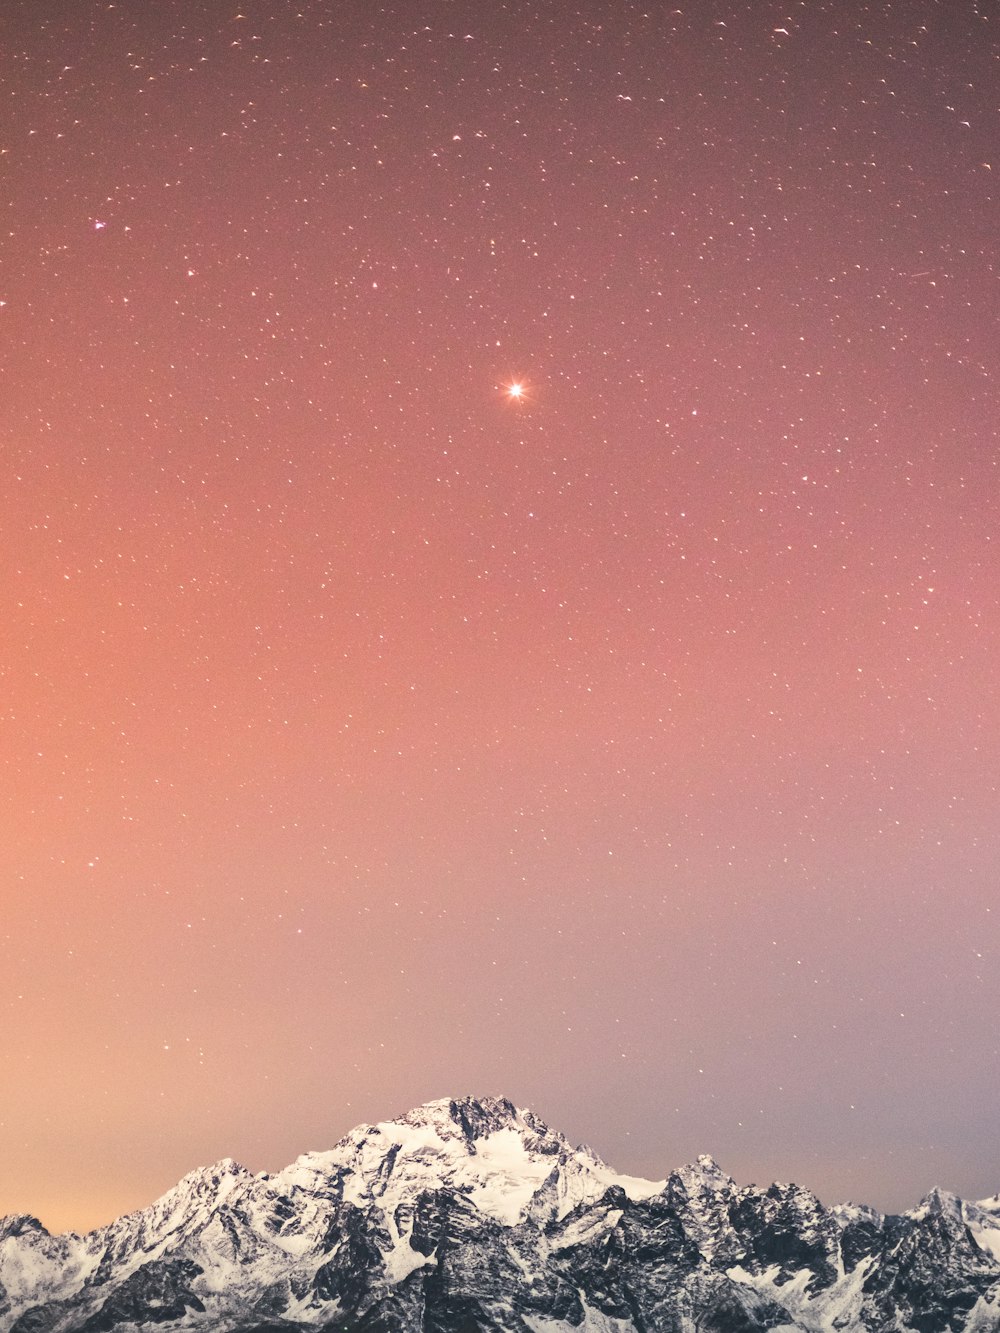 snow covered mountain under blue sky with stars during night time